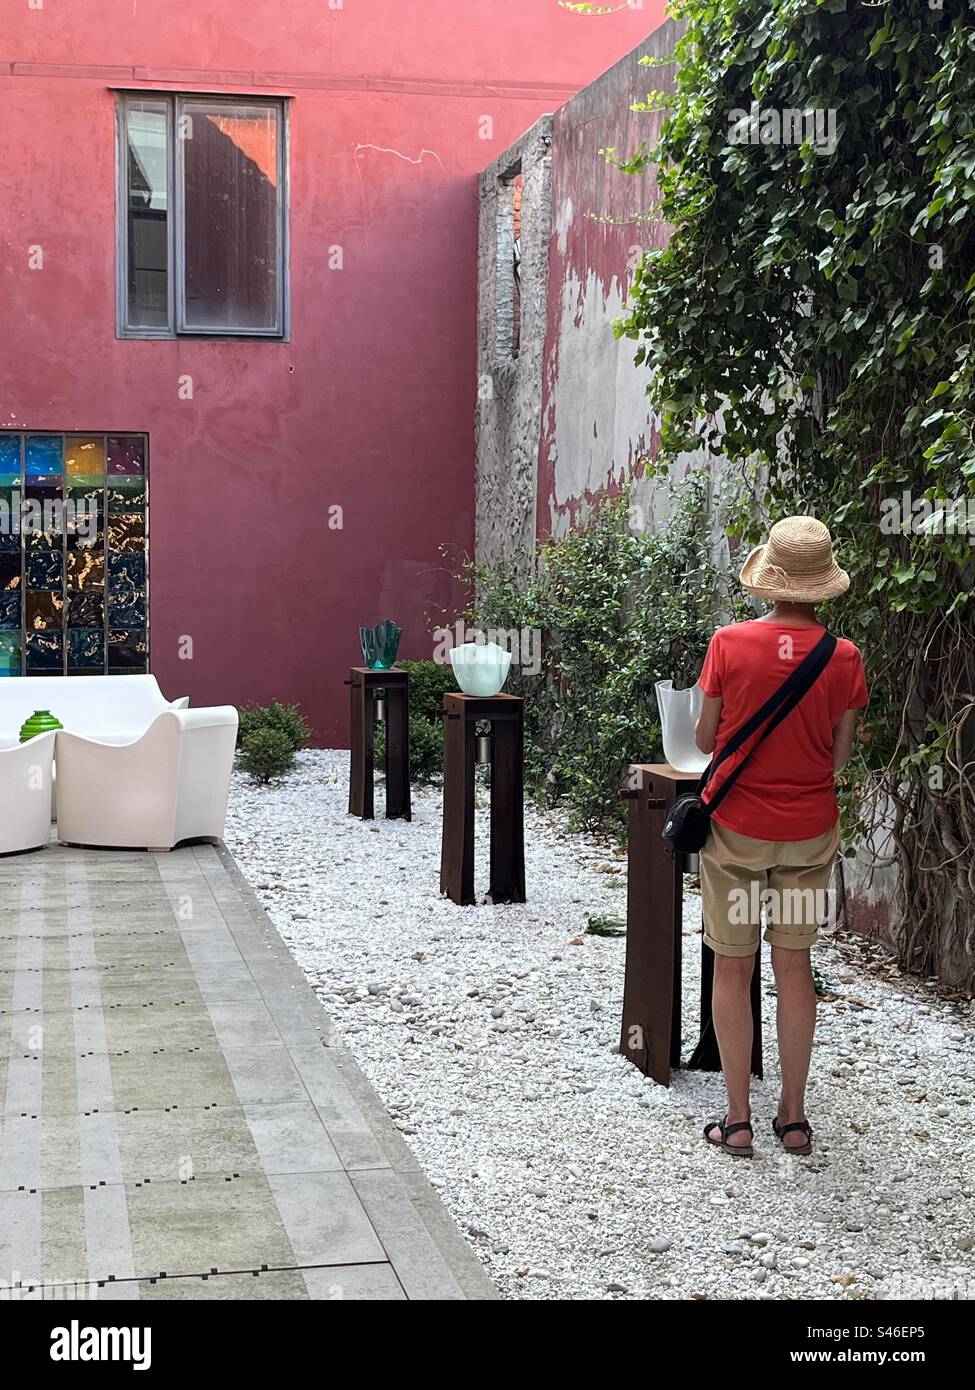 Back view of woman looking at a Venician glass bowl in an outdoor gallery space Stock Photo